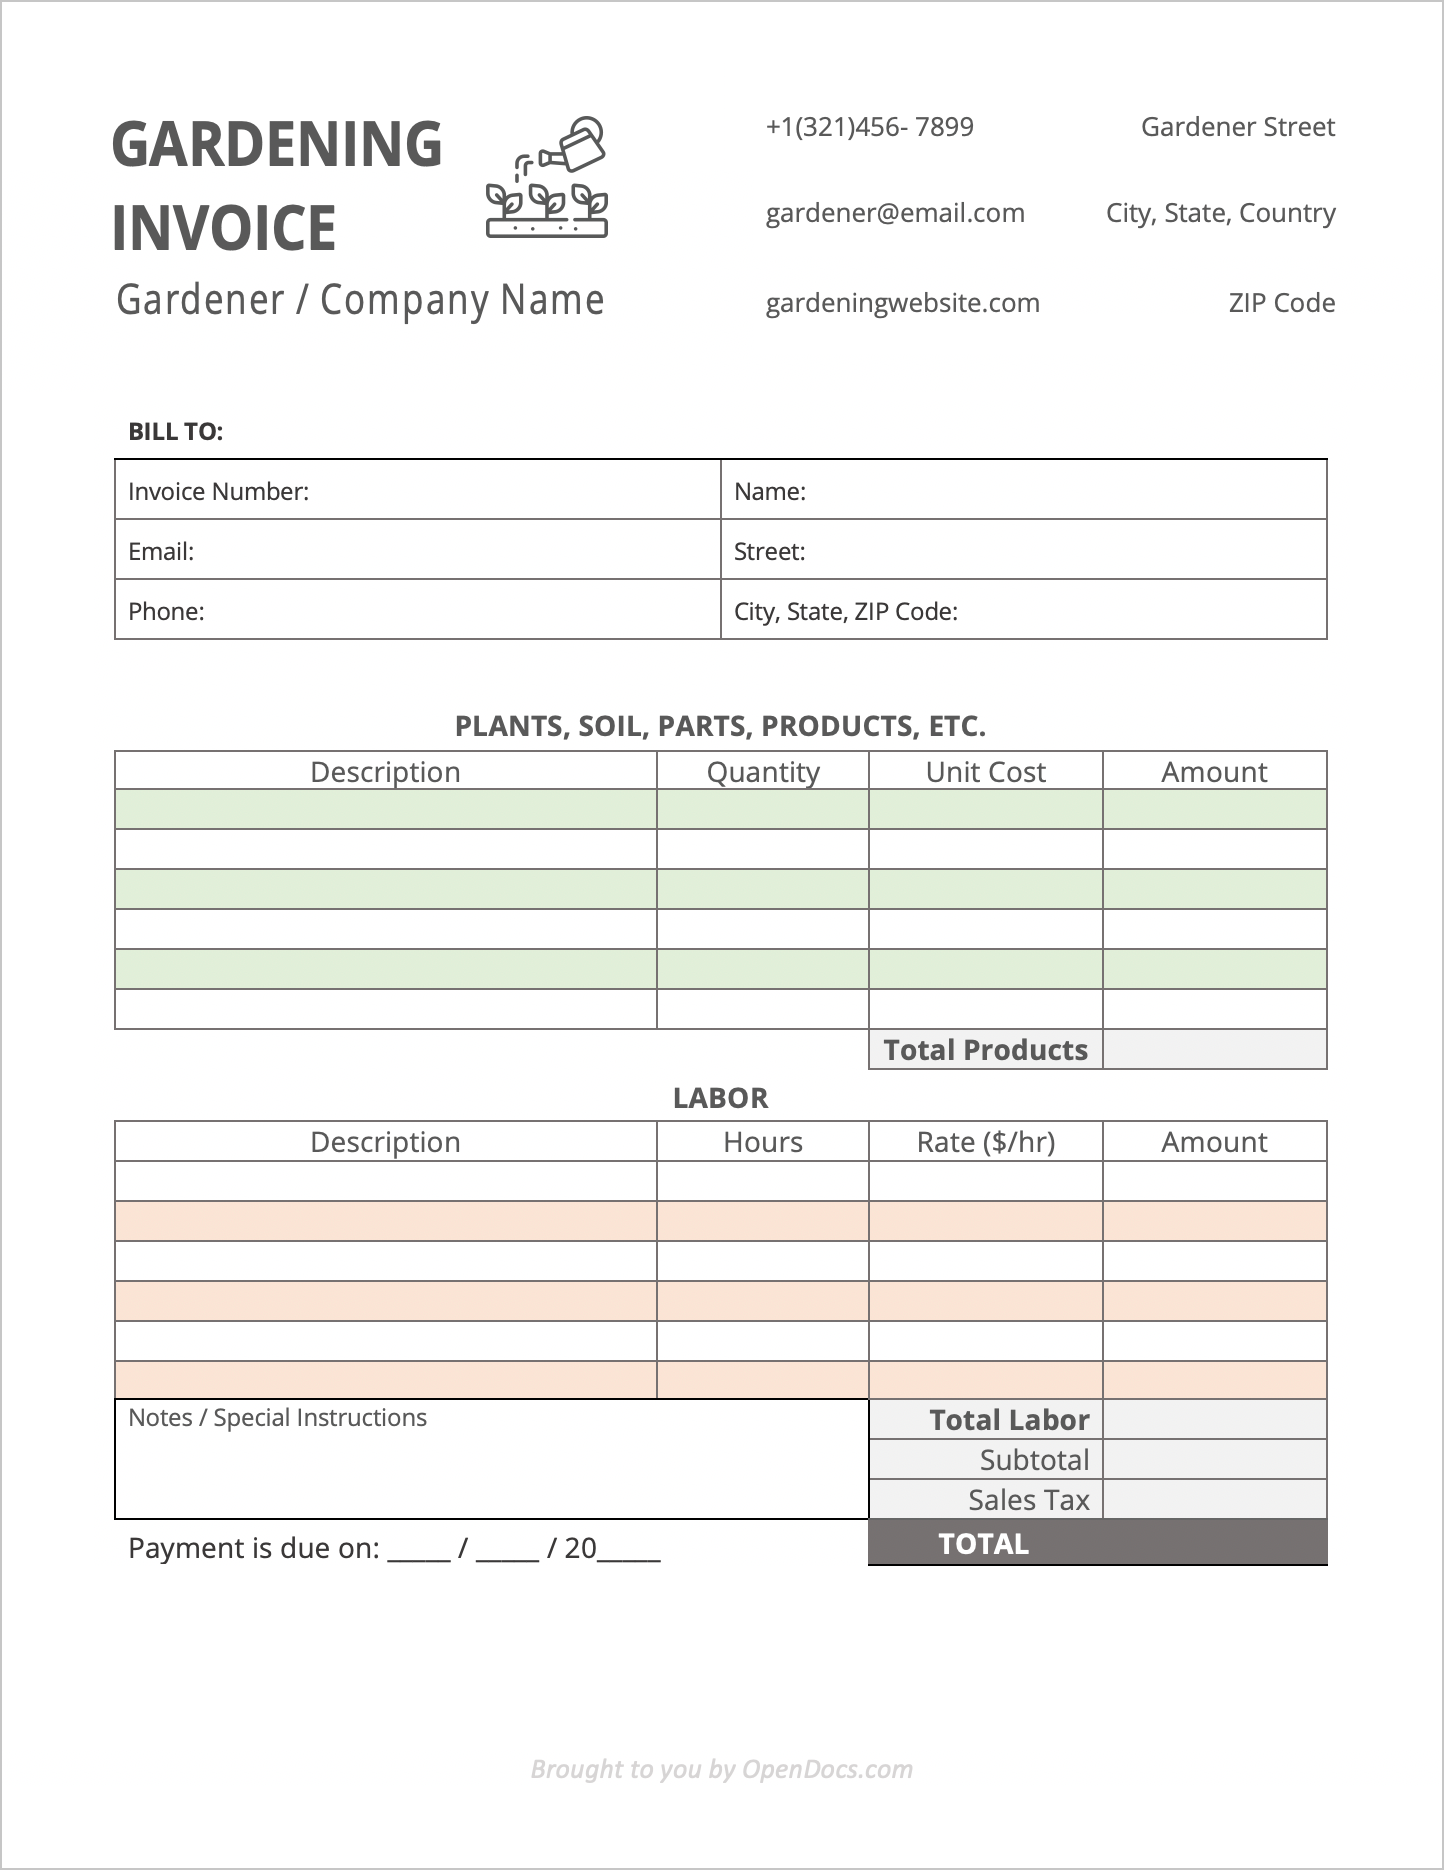 Free Gardening Invoice Template  PDF  WORD  EXCEL With Lawn Maintenance Invoice Template